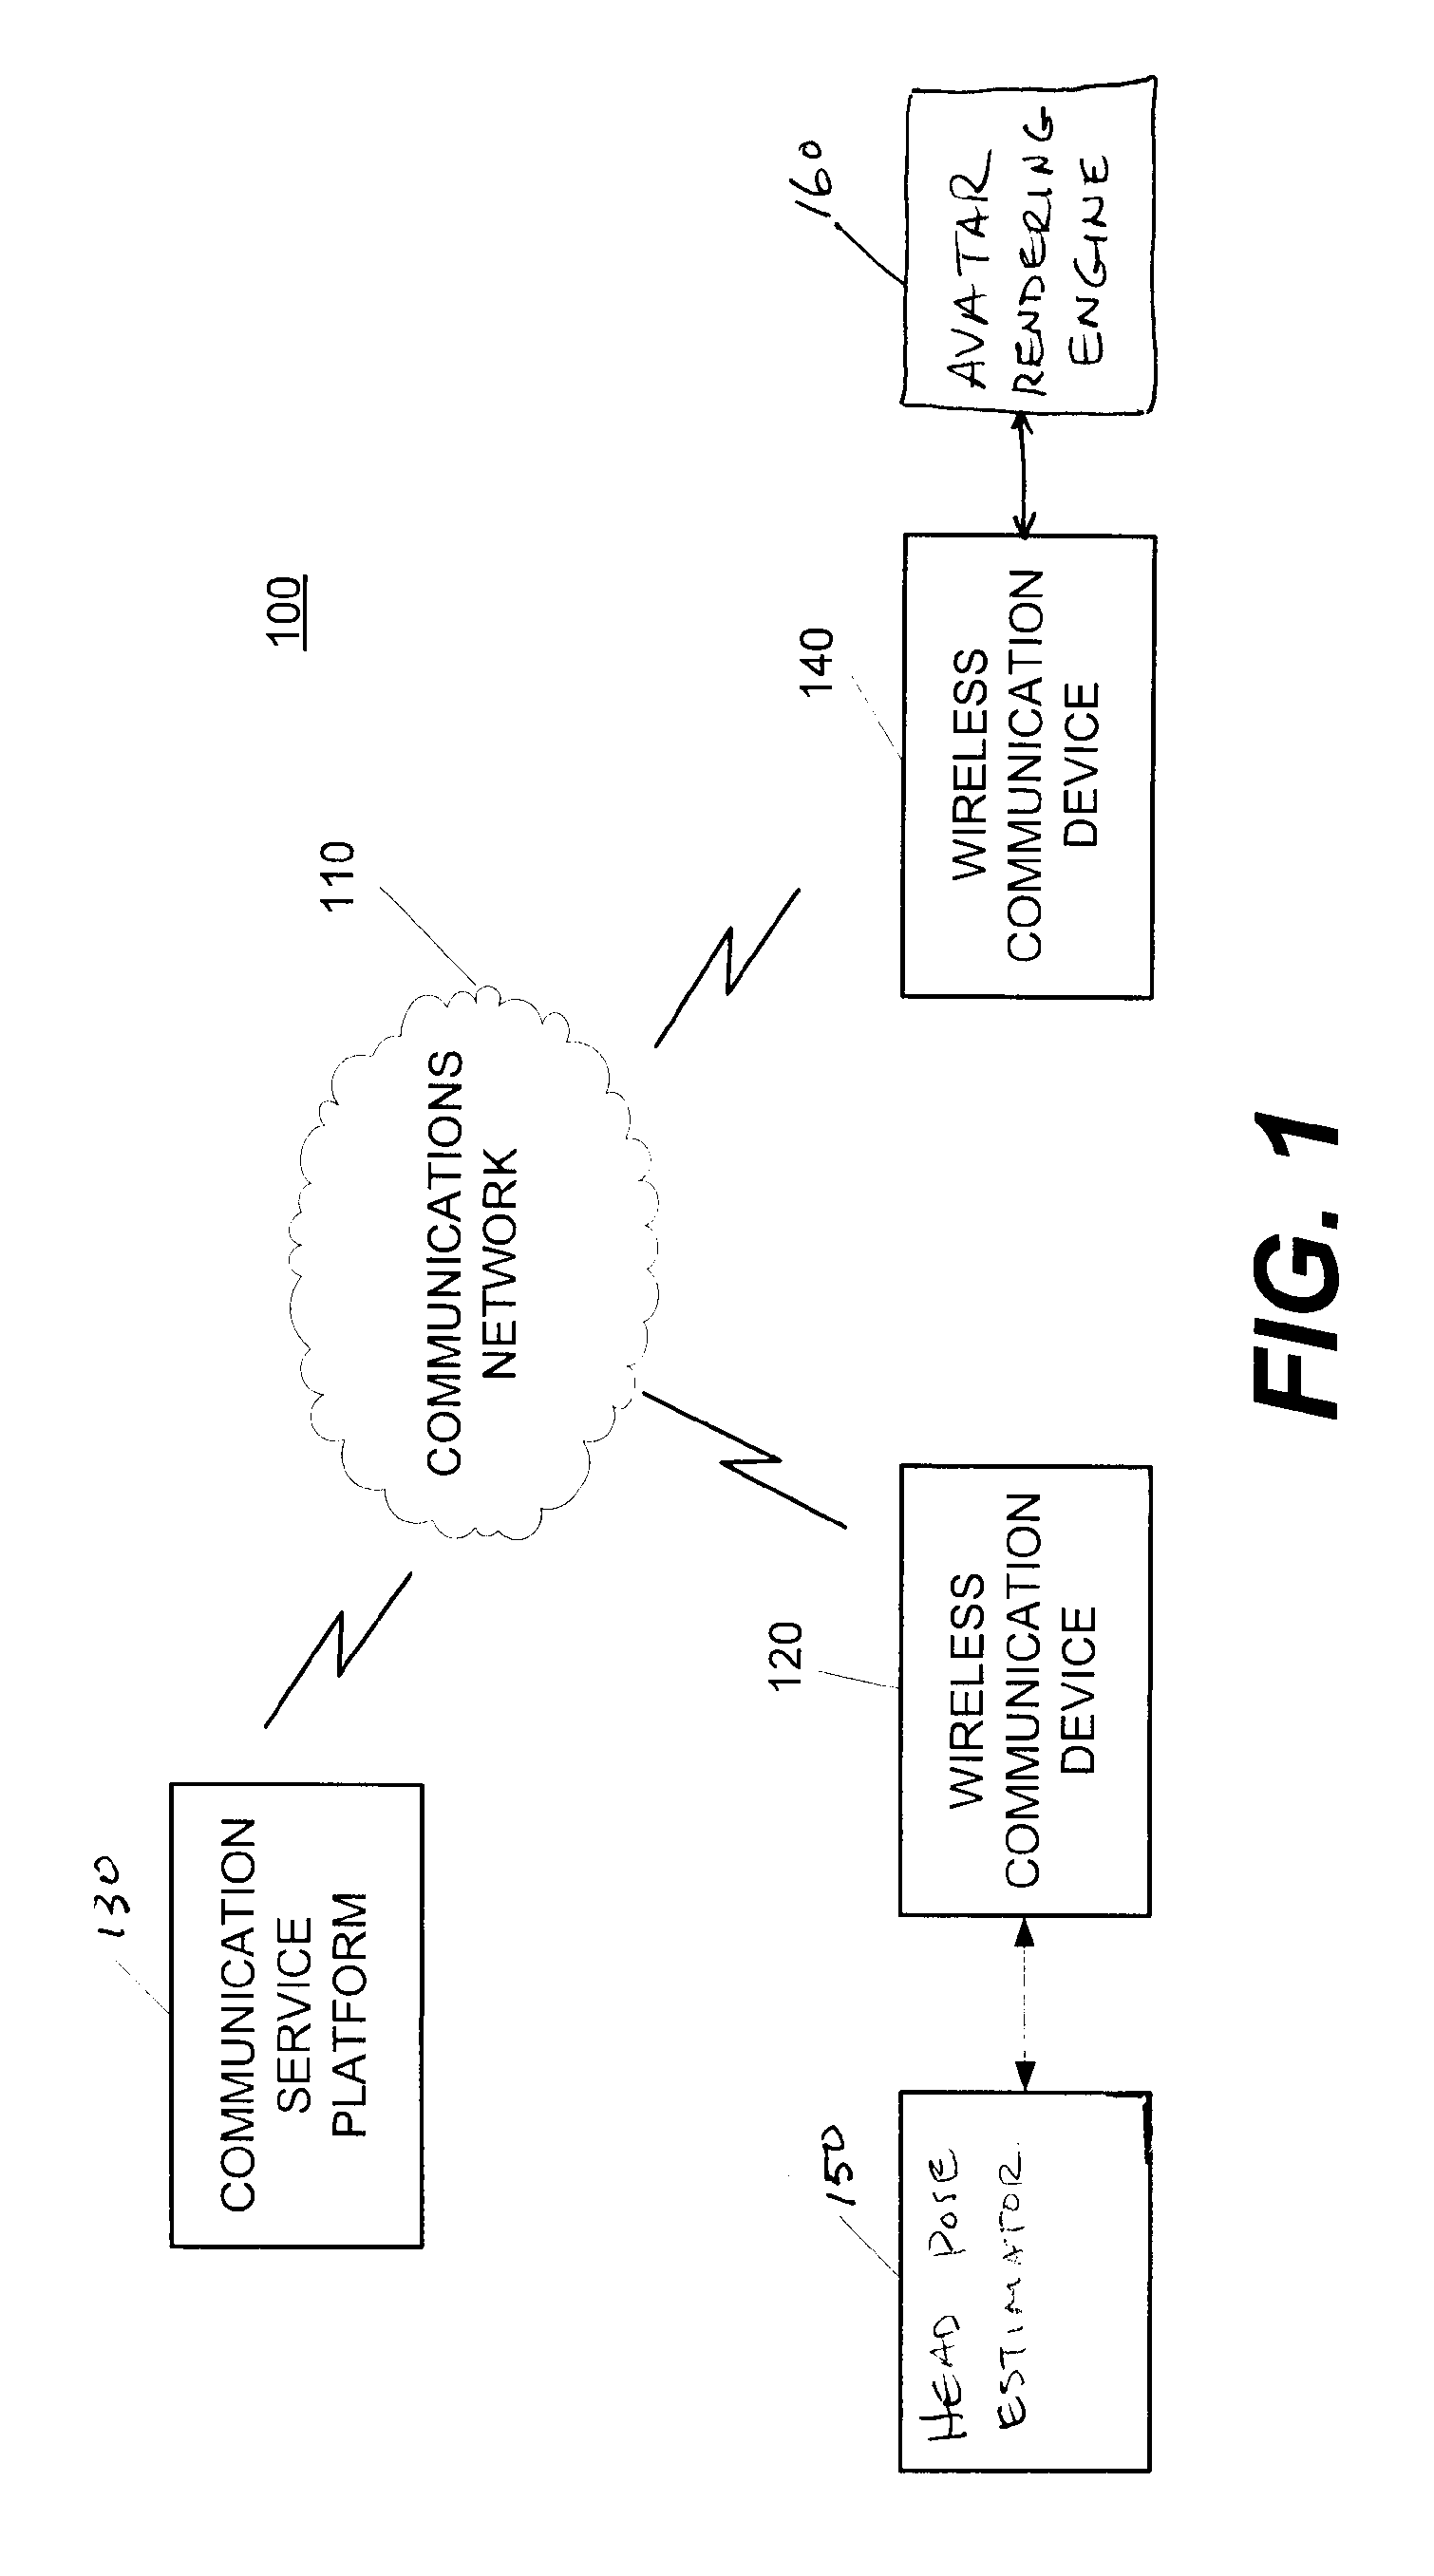 Apparatus and methods for head pose estimation and head gesture detection